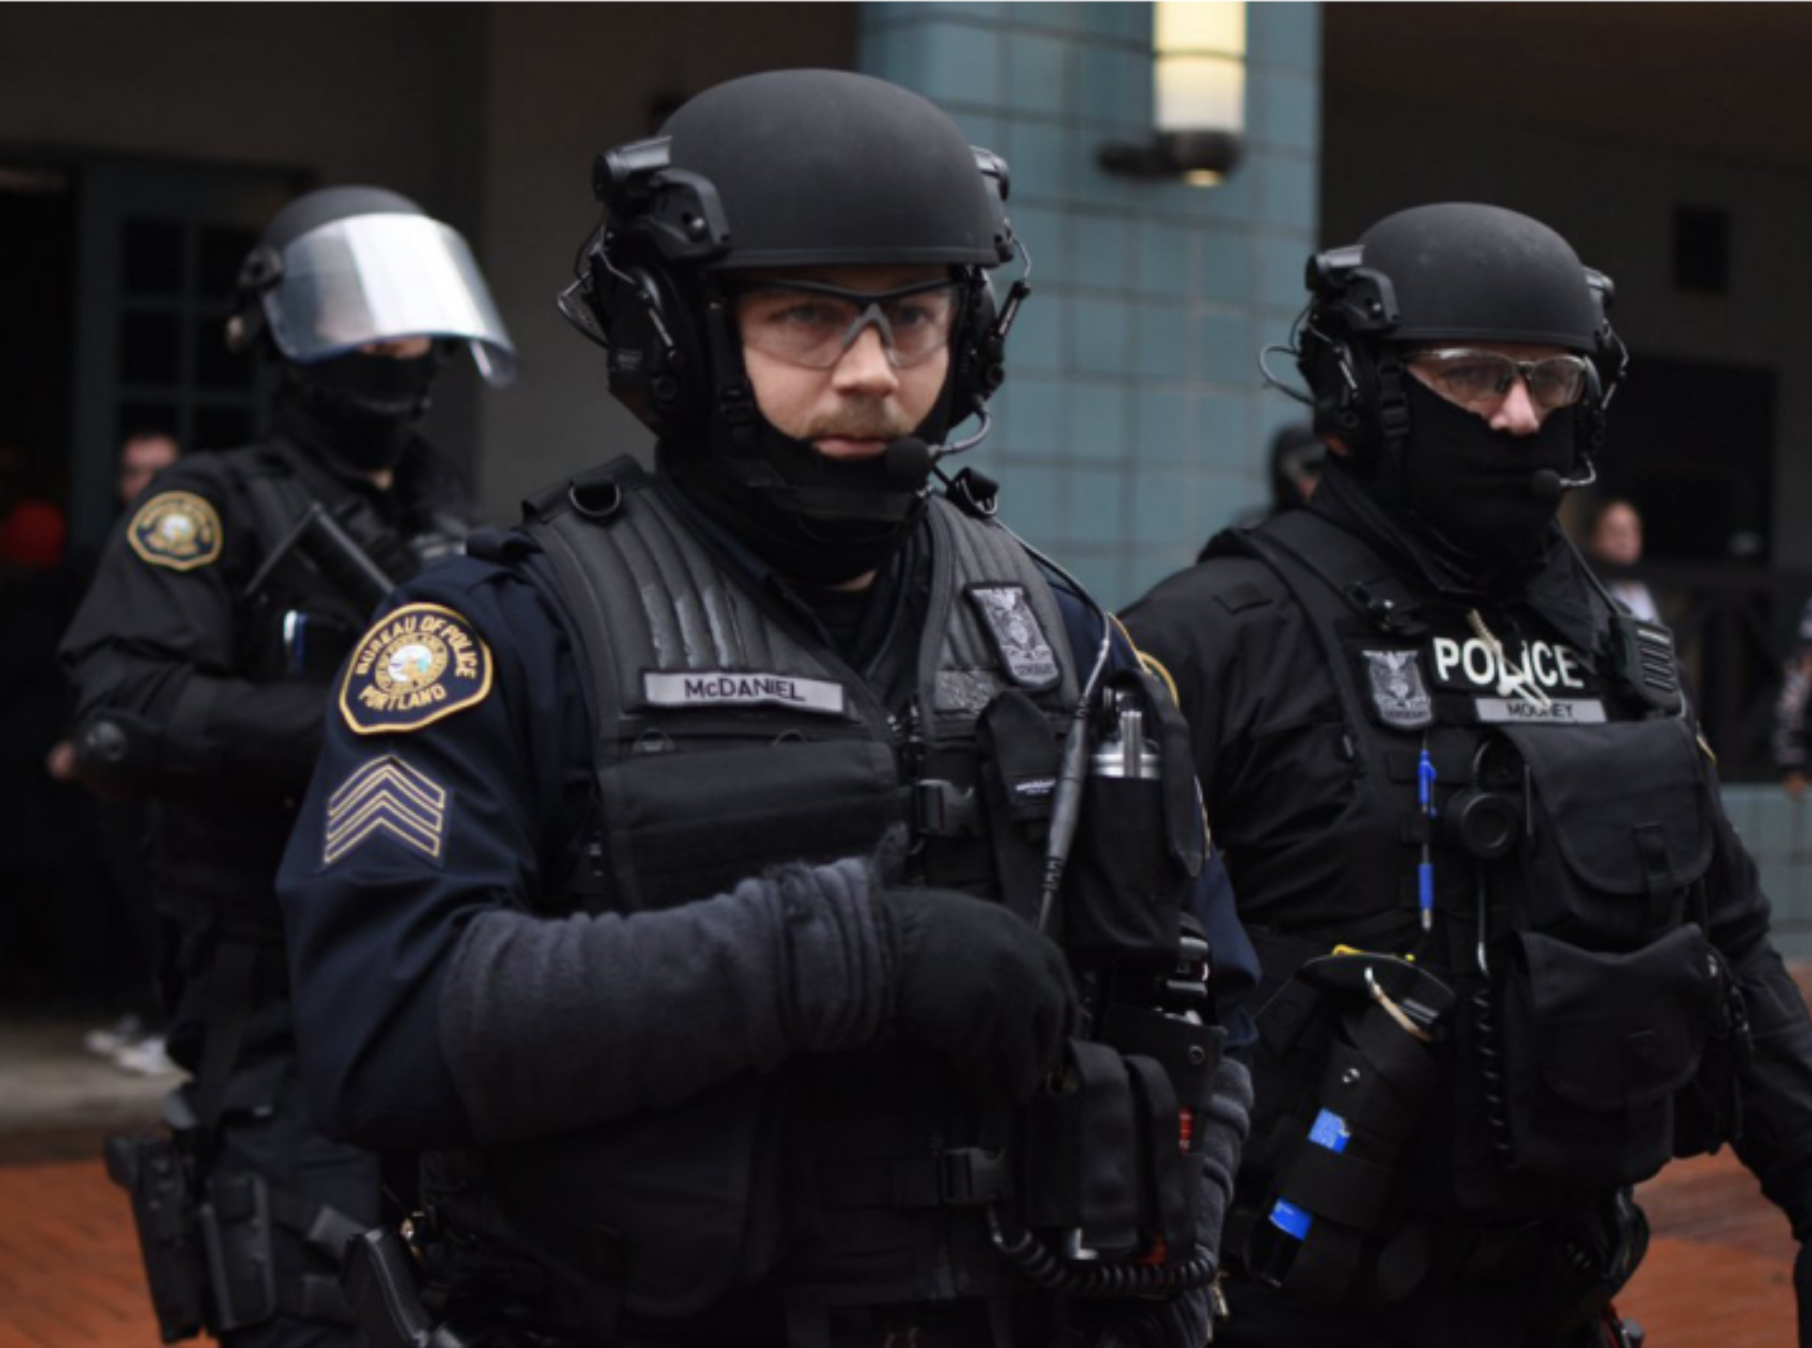 Portland police training on protests ends with slide showing mock